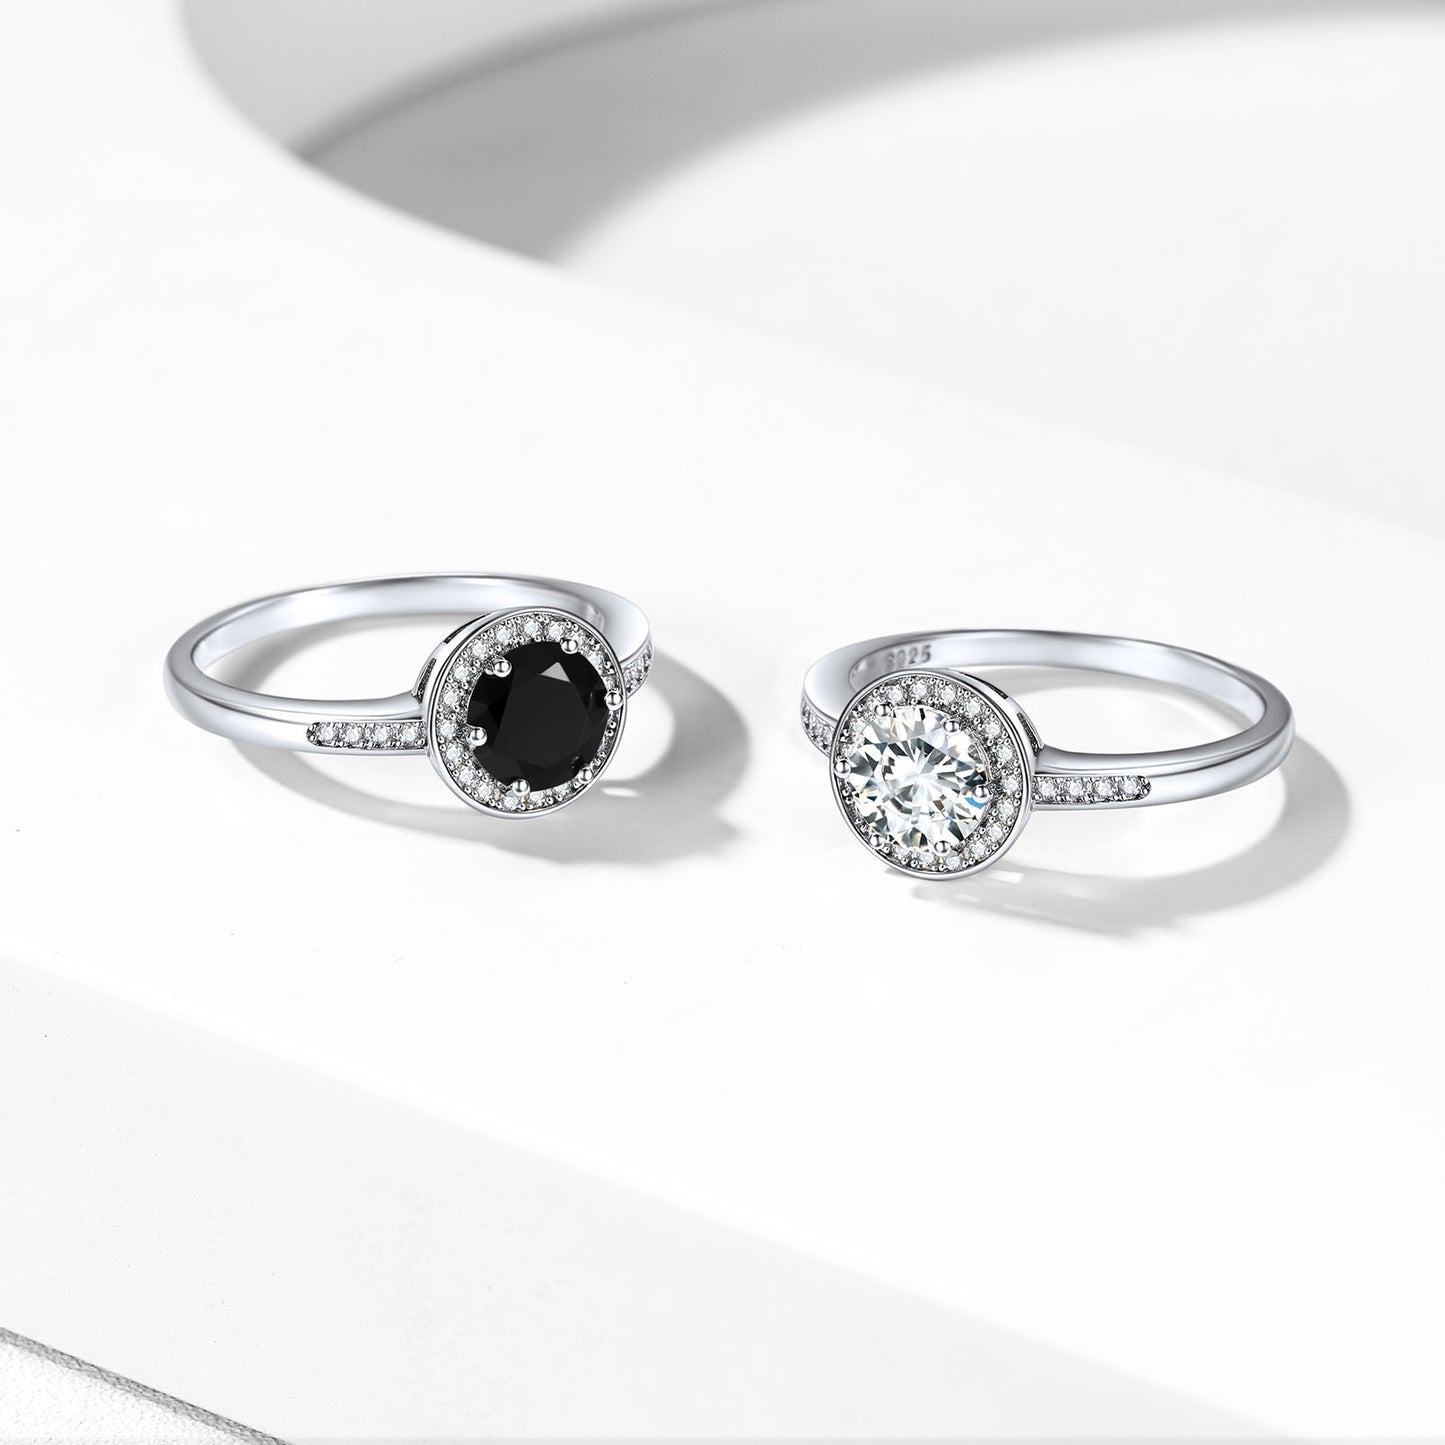 Sterling Silver Black Cubic Zirconia Round Halo Gemstone Rings